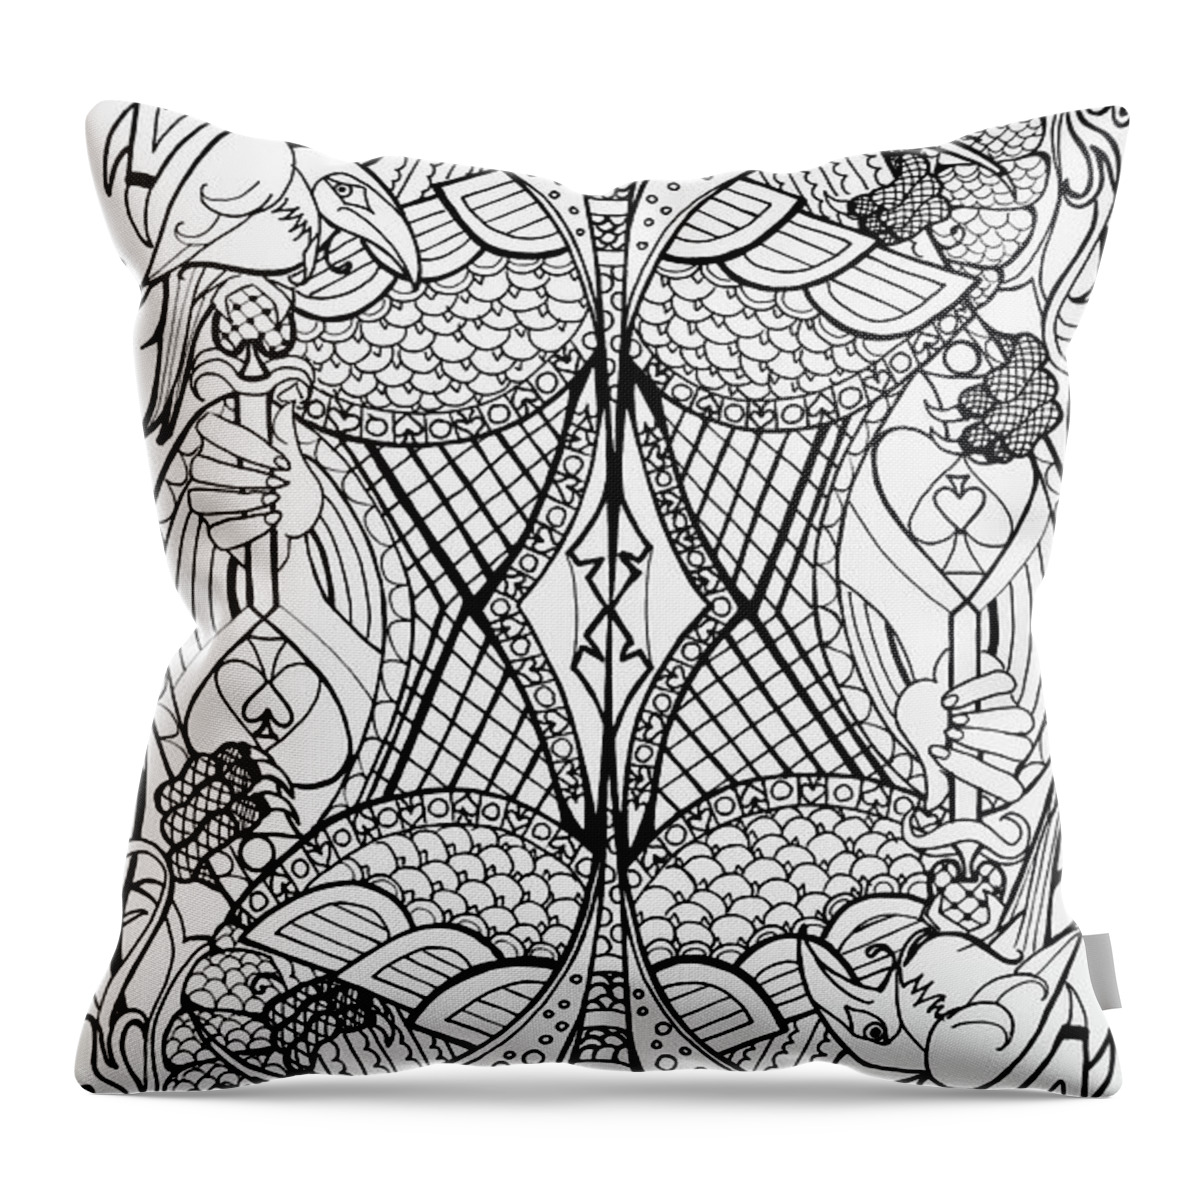 Queen Of Spades Throw Pillow featuring the drawing Queen Of Spades 2 by Jani Freimann